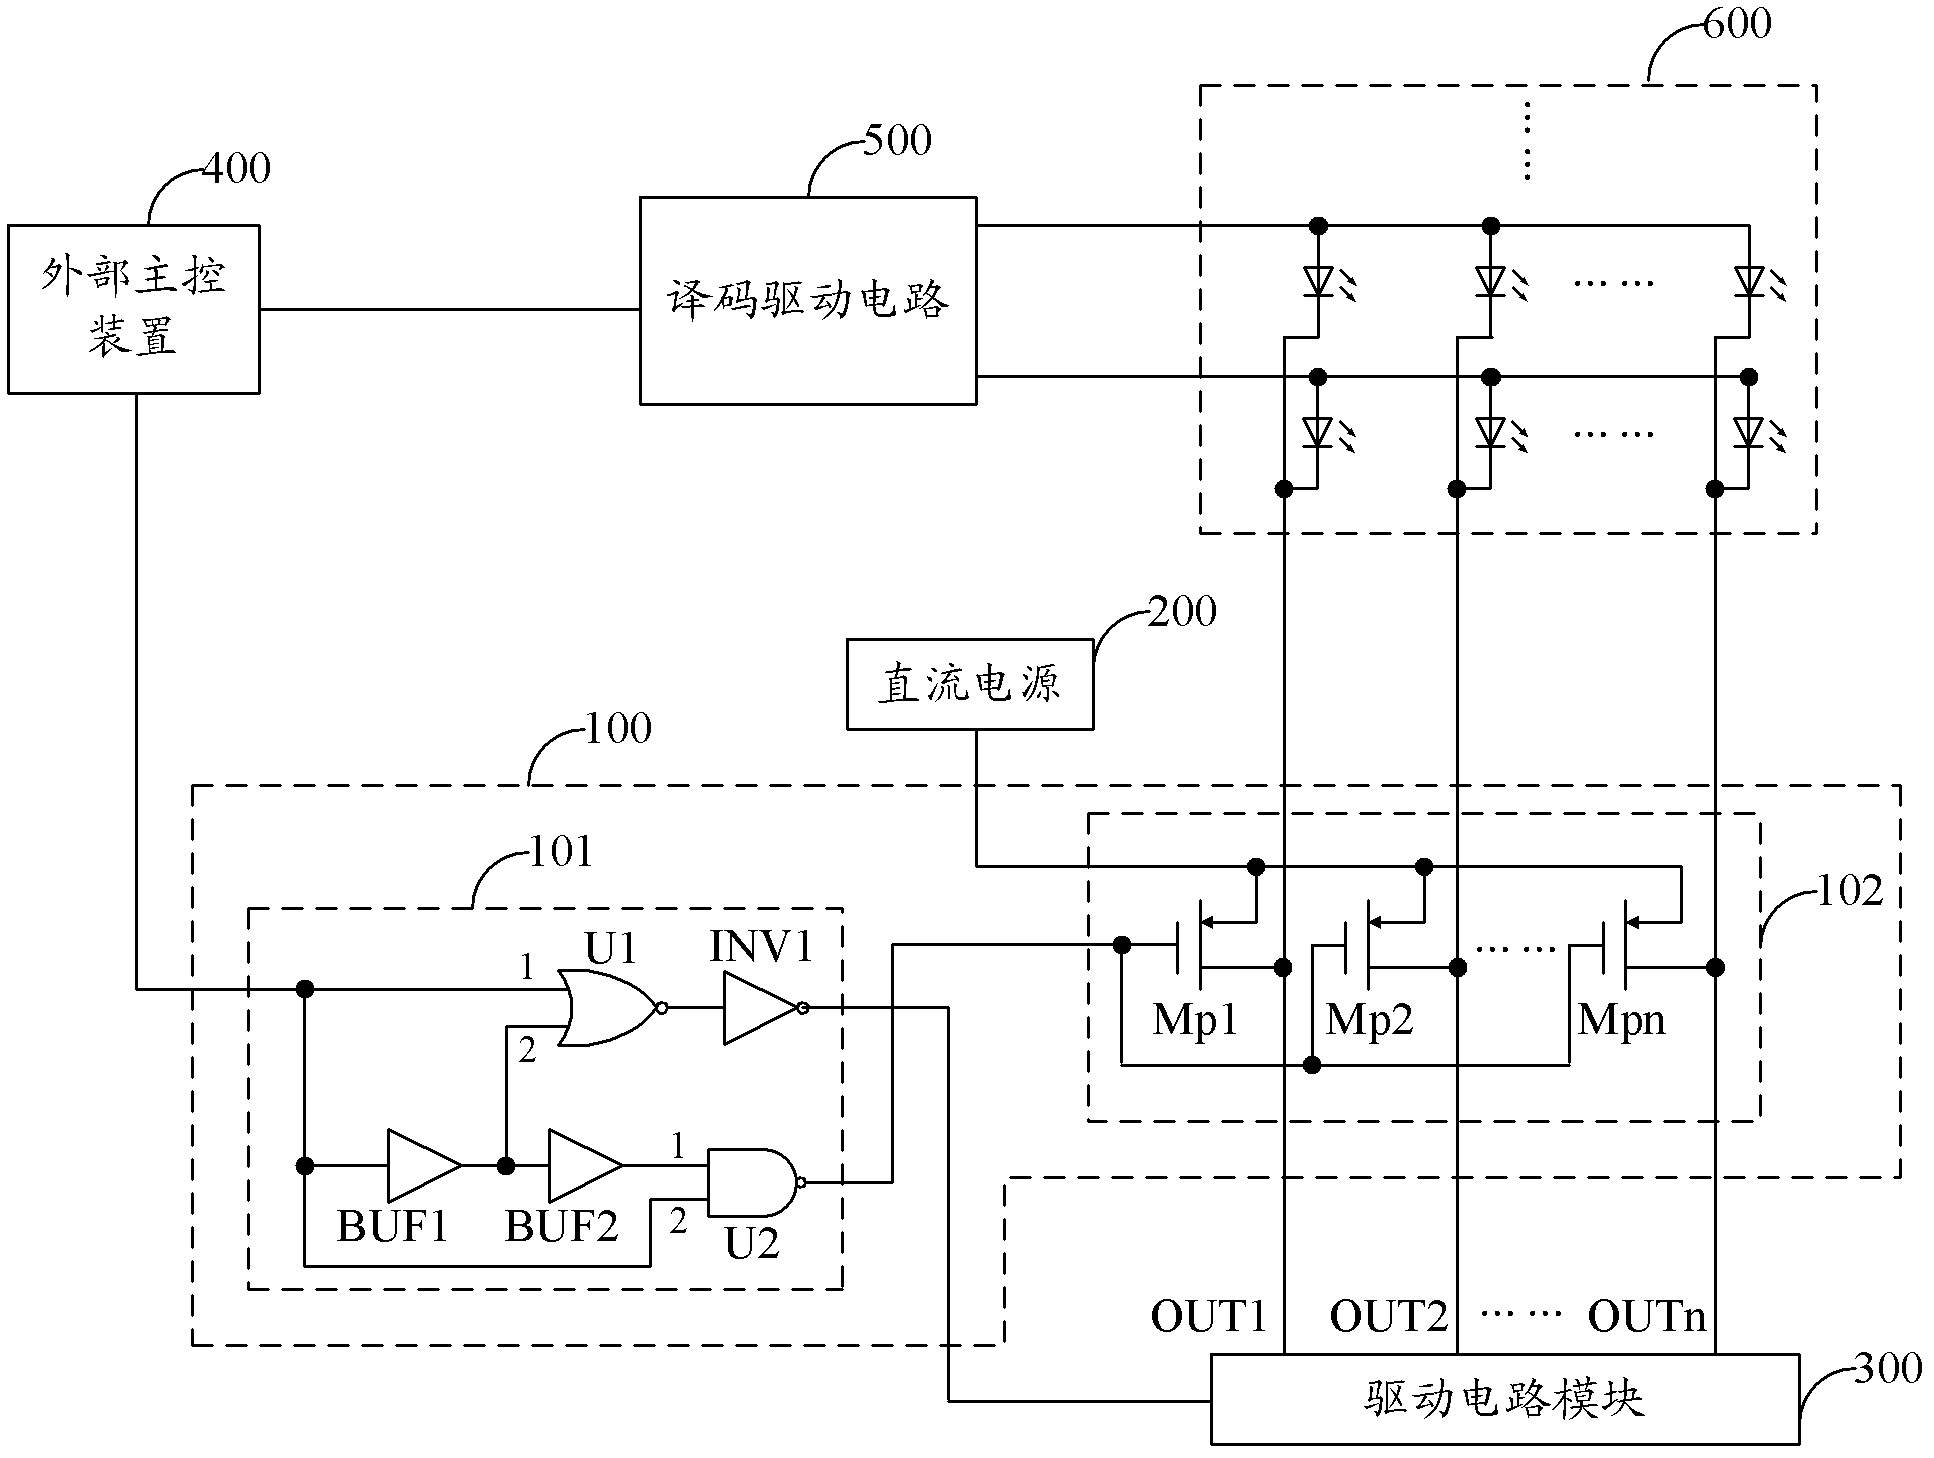 Blanking control circuit for LED (light-emitting diode) display screens and LED drive chip